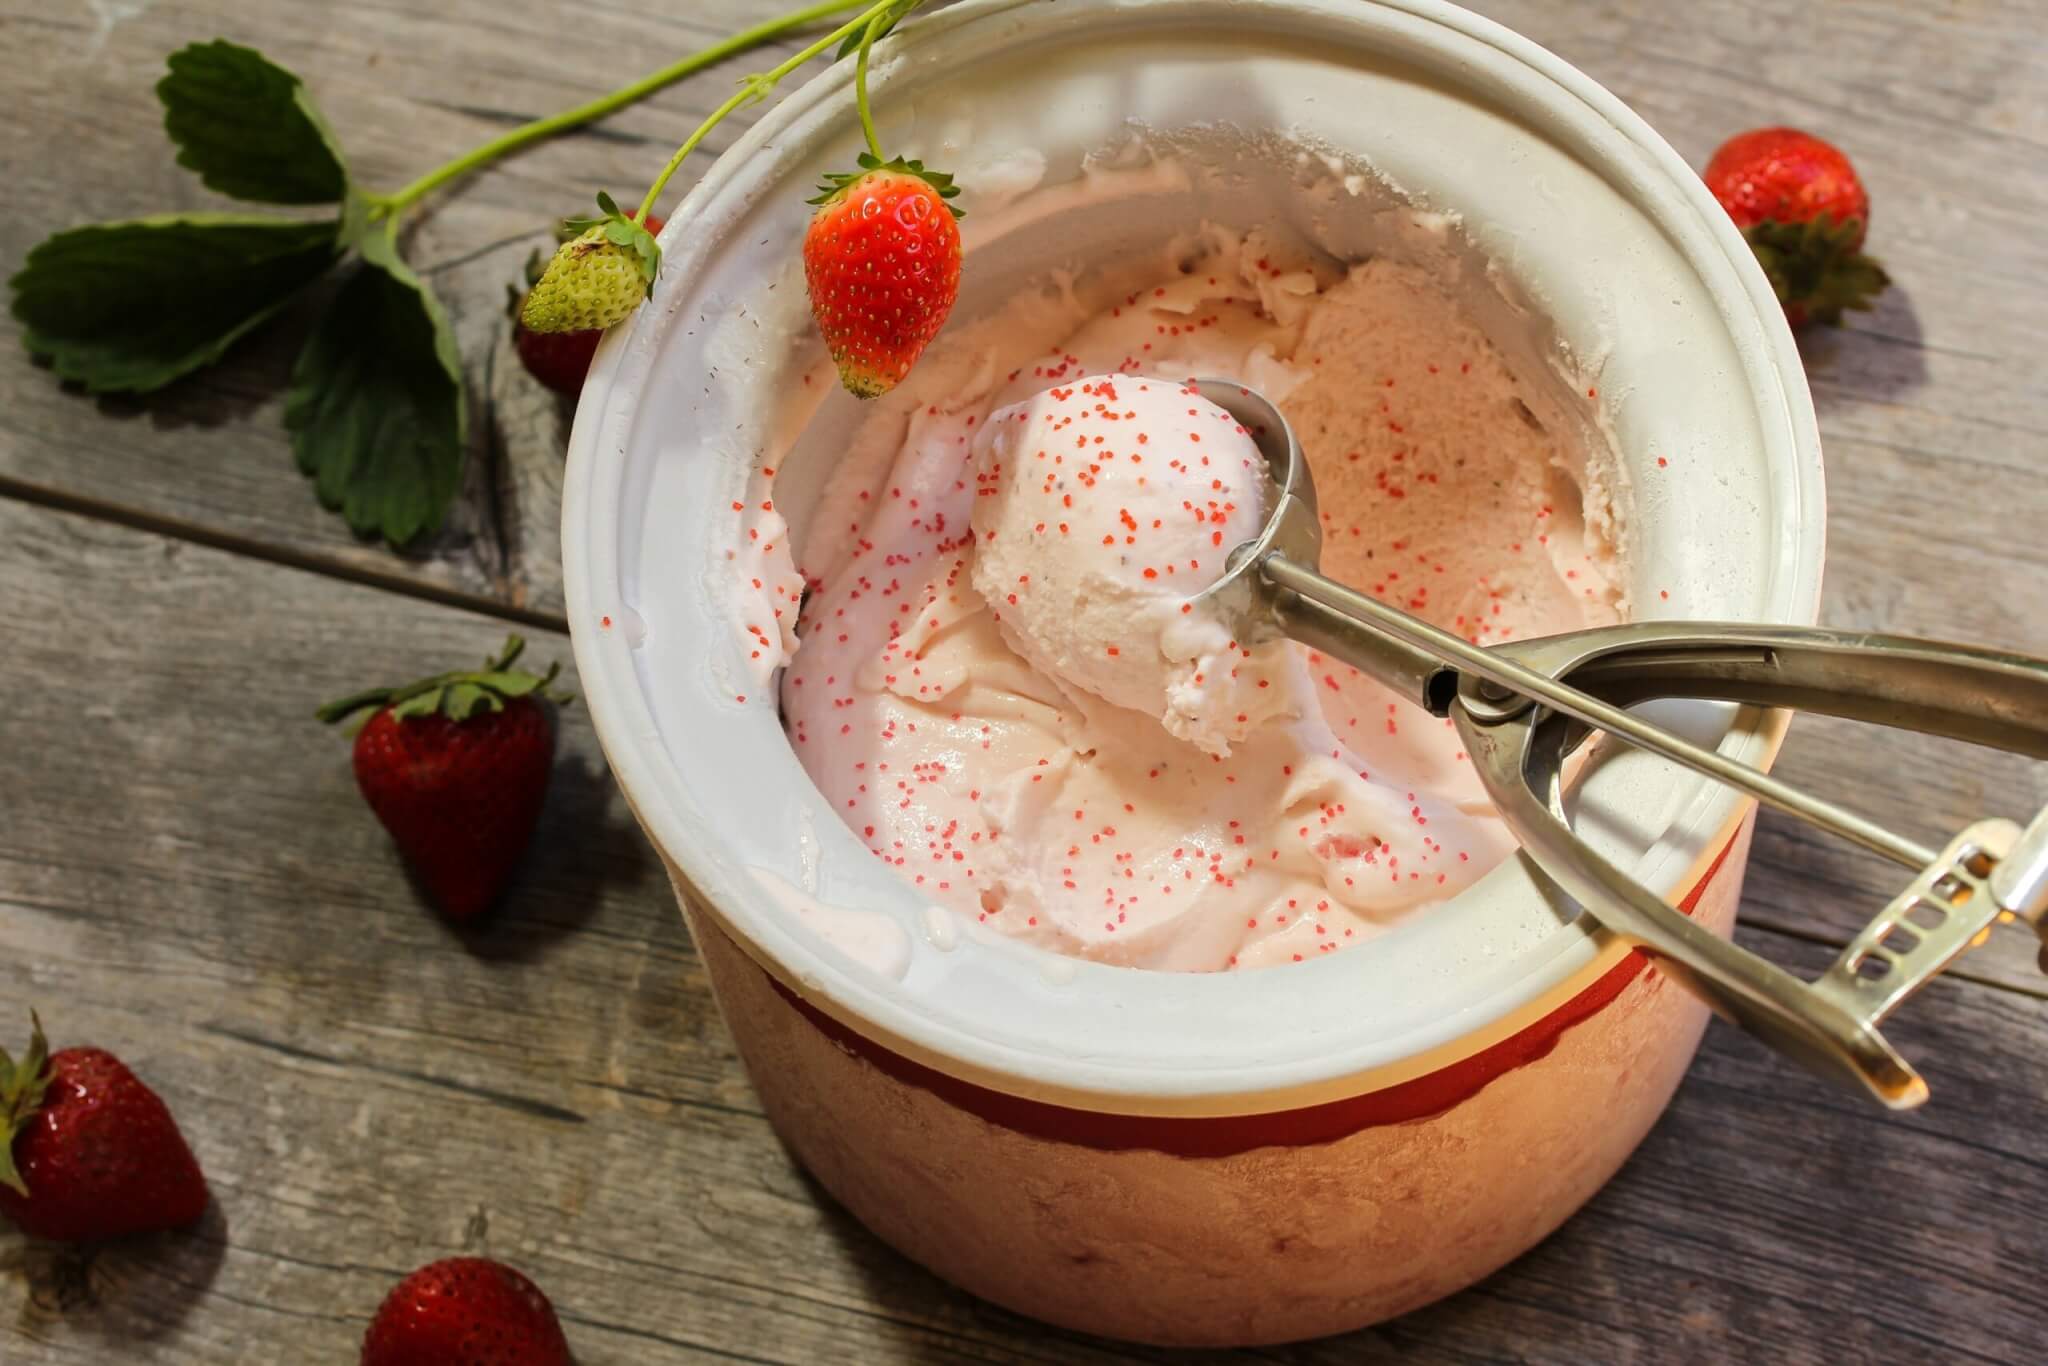 Best Ice Cream Makers: Top 5 Appliances Most Recommended By Experts